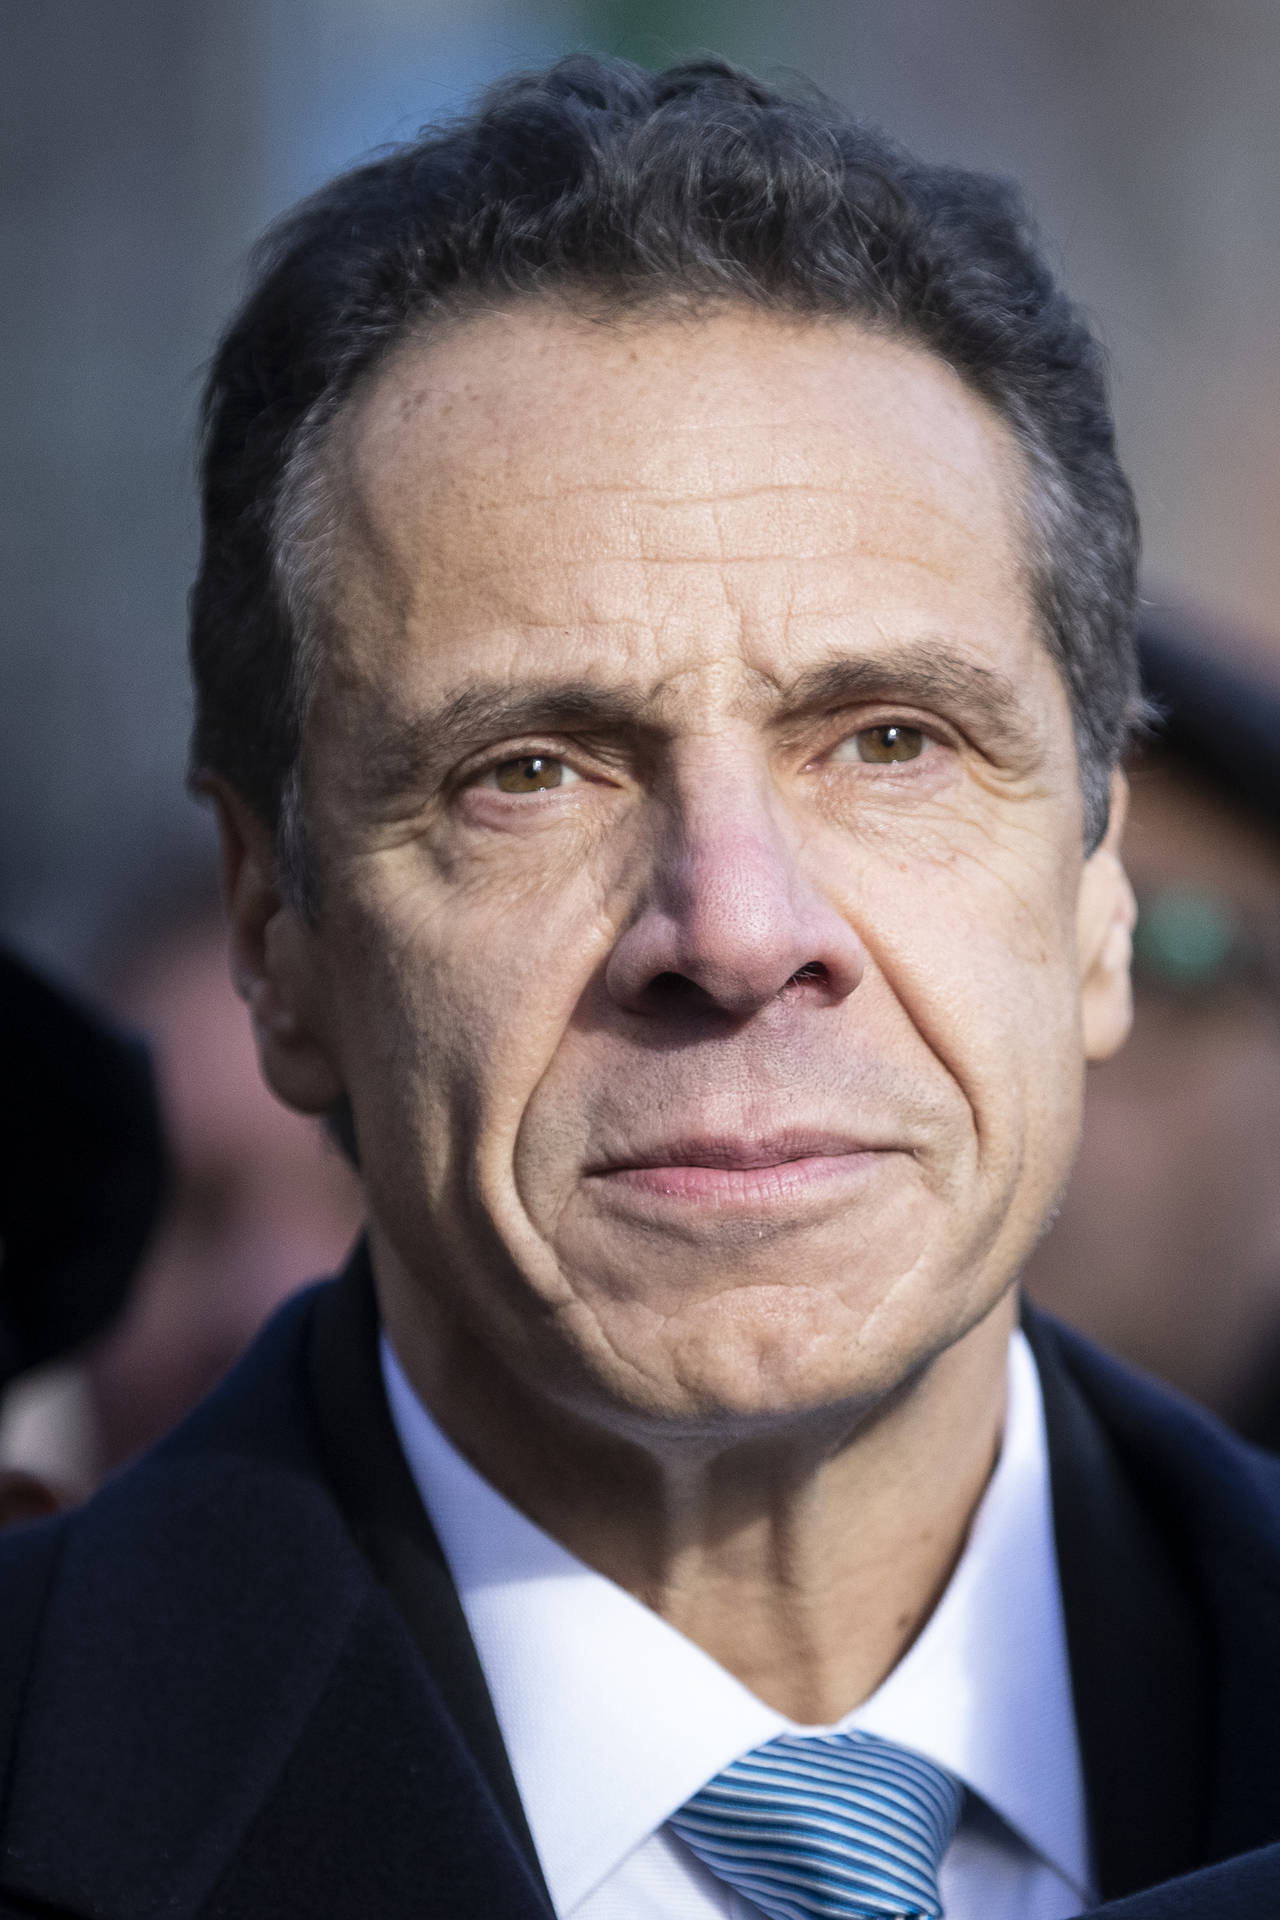 Serious Photo Of Andrew Cuomo Wallpaper